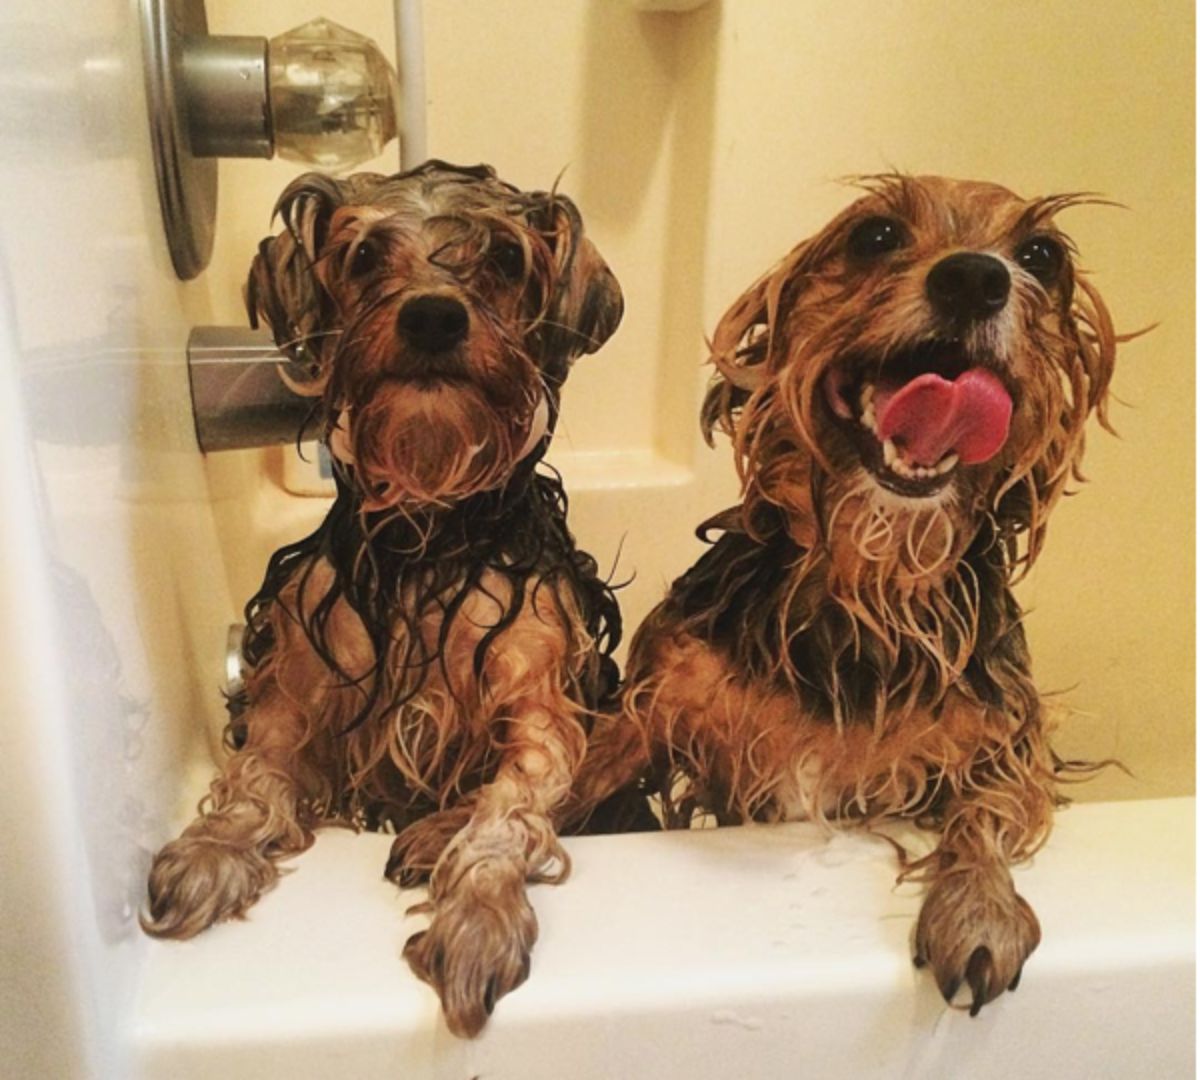 2 wet black and brown dog in a bathtub